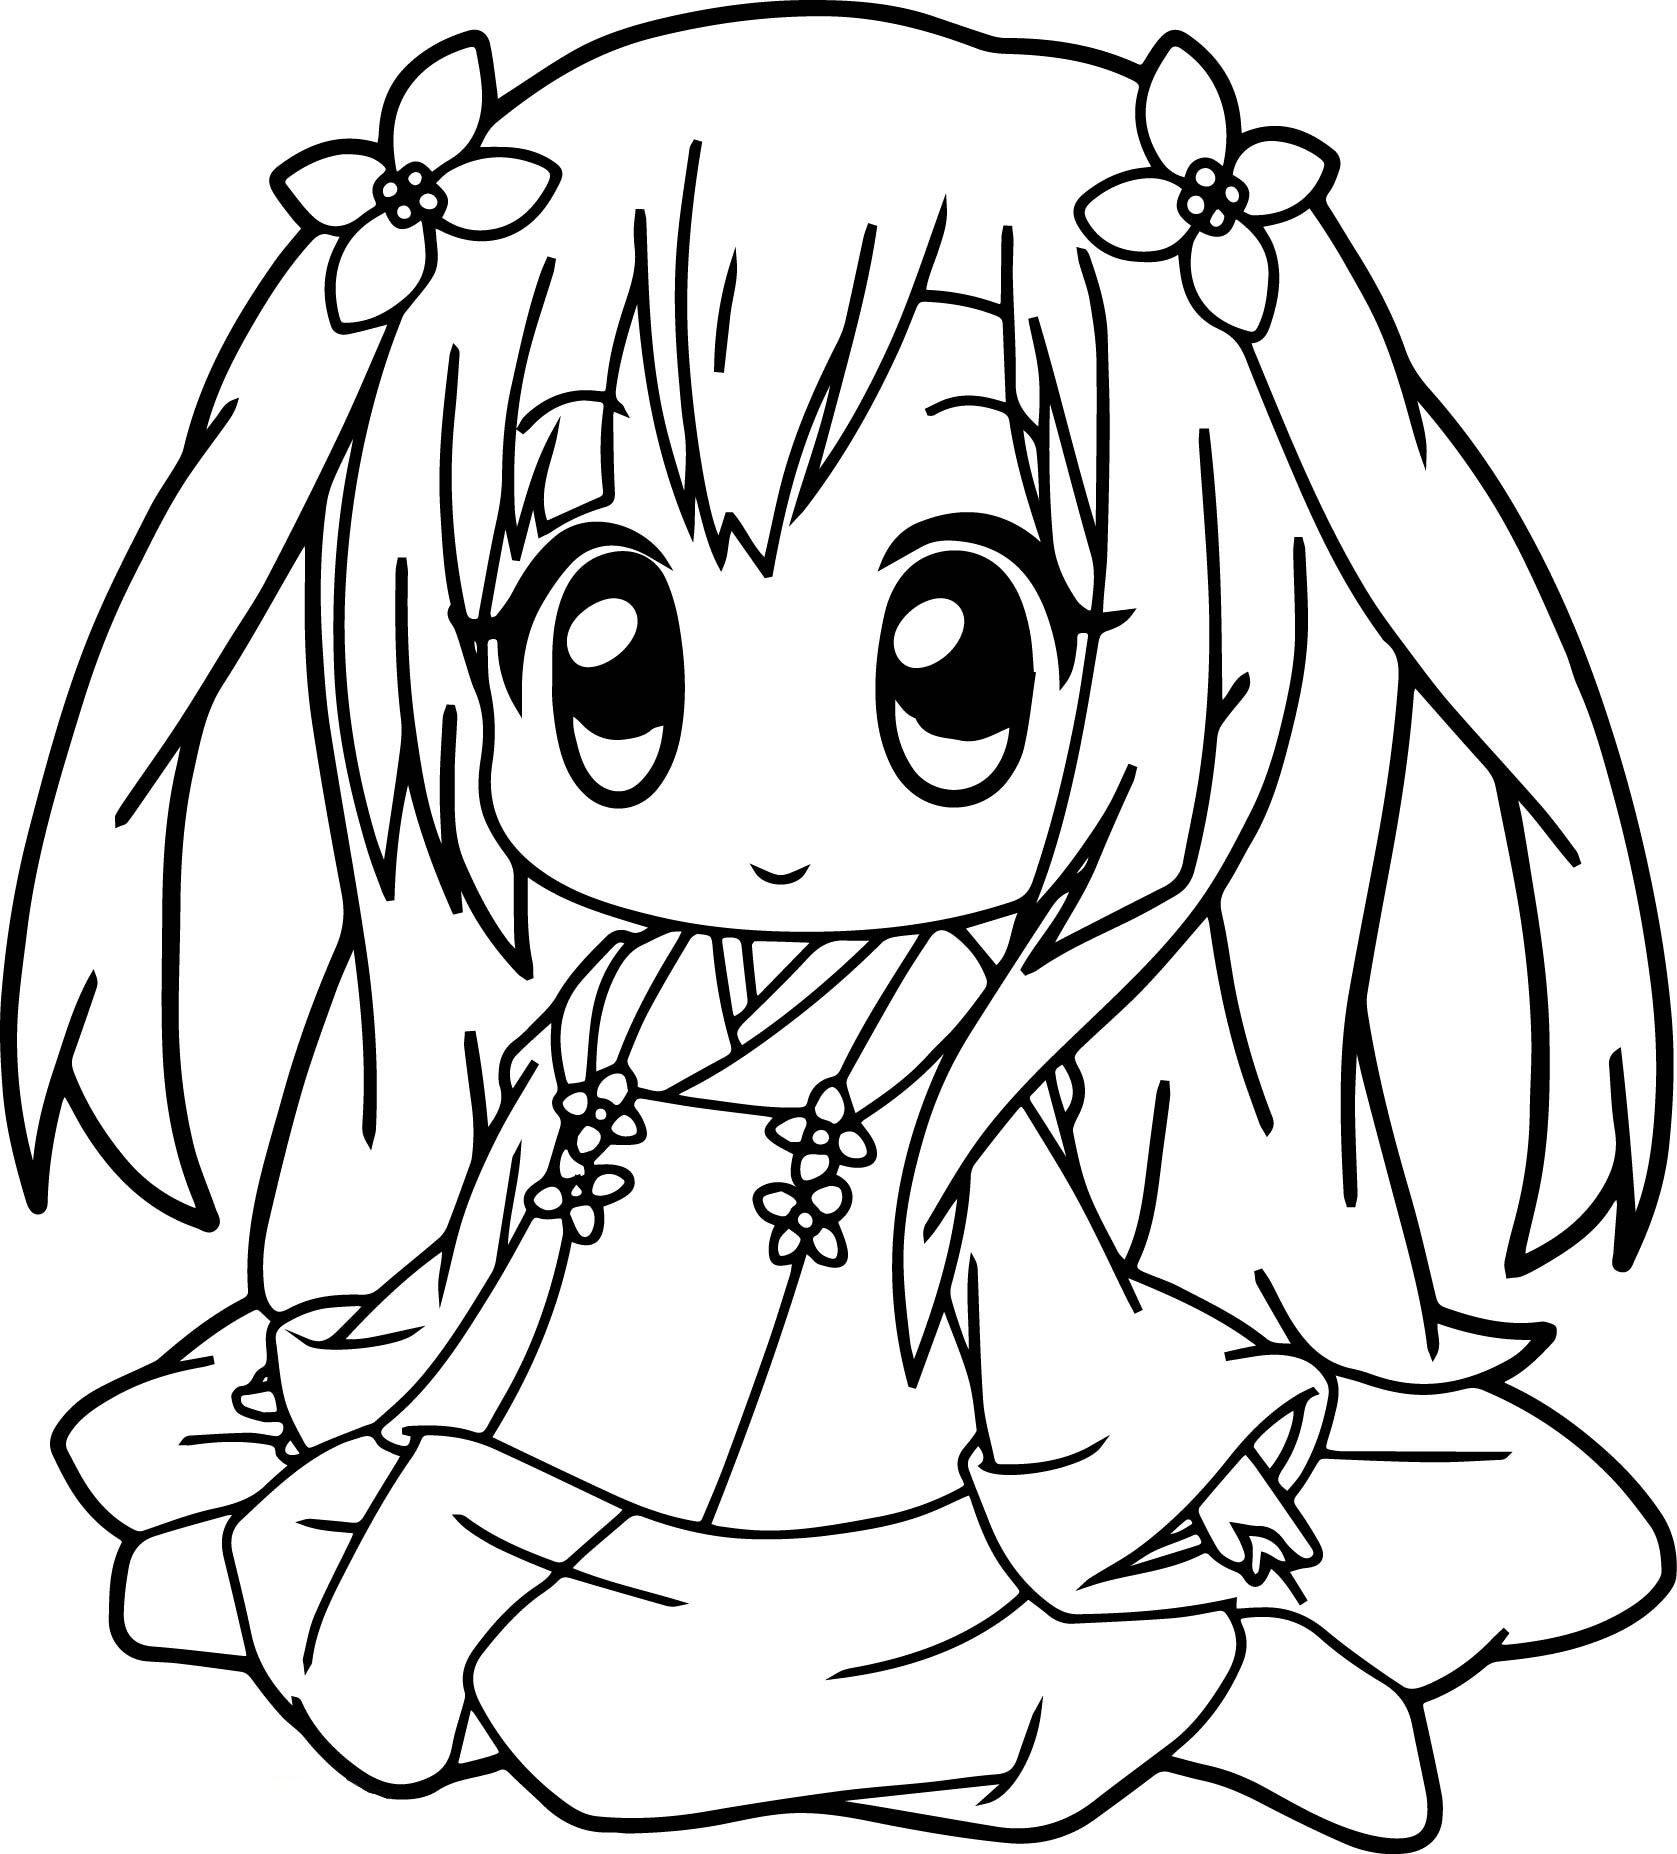 draw so cute girl coloring pages